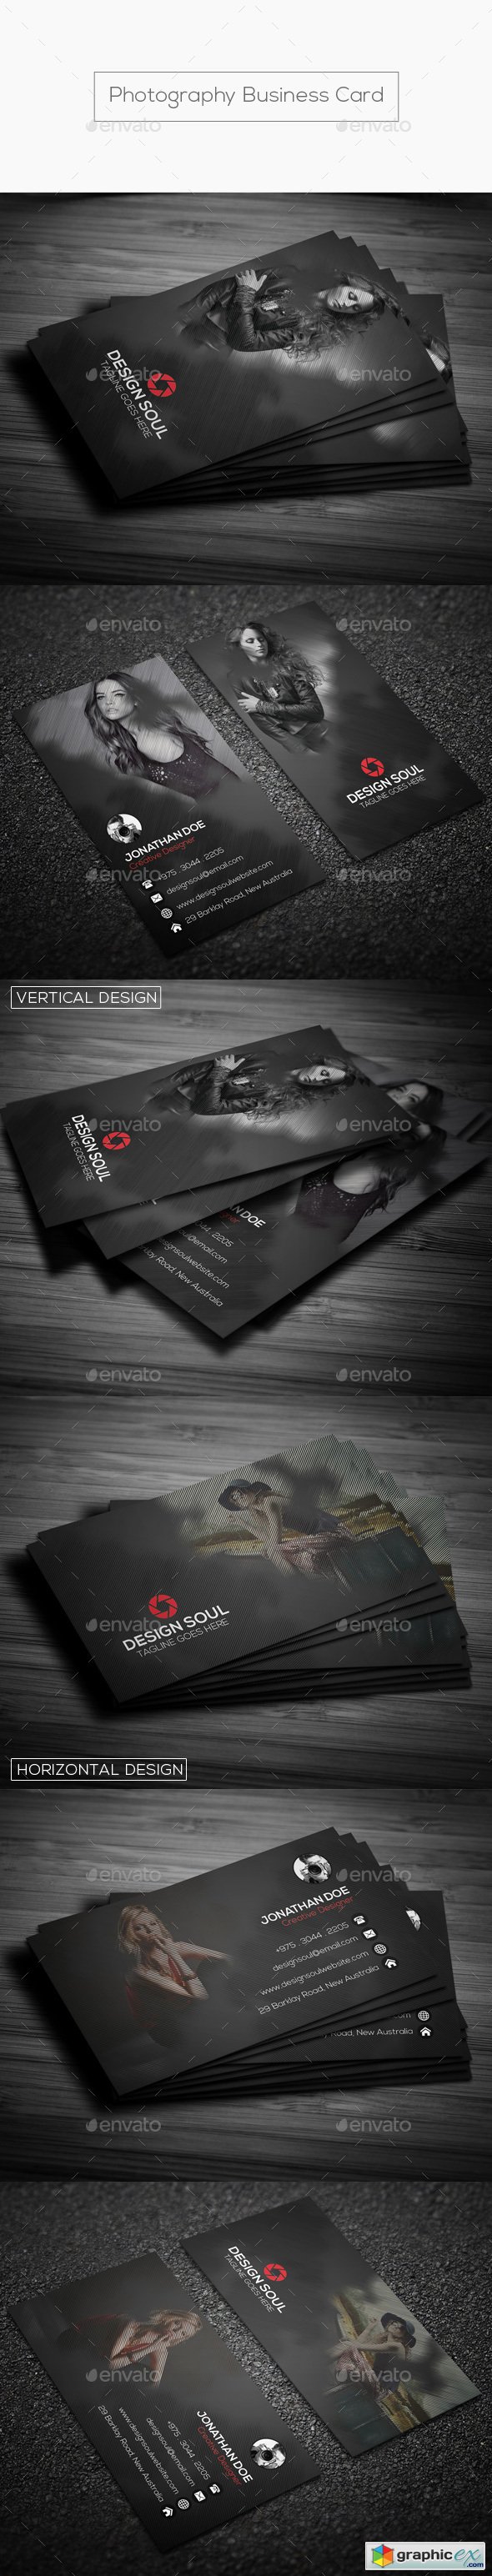 Photography Business Card 17664344